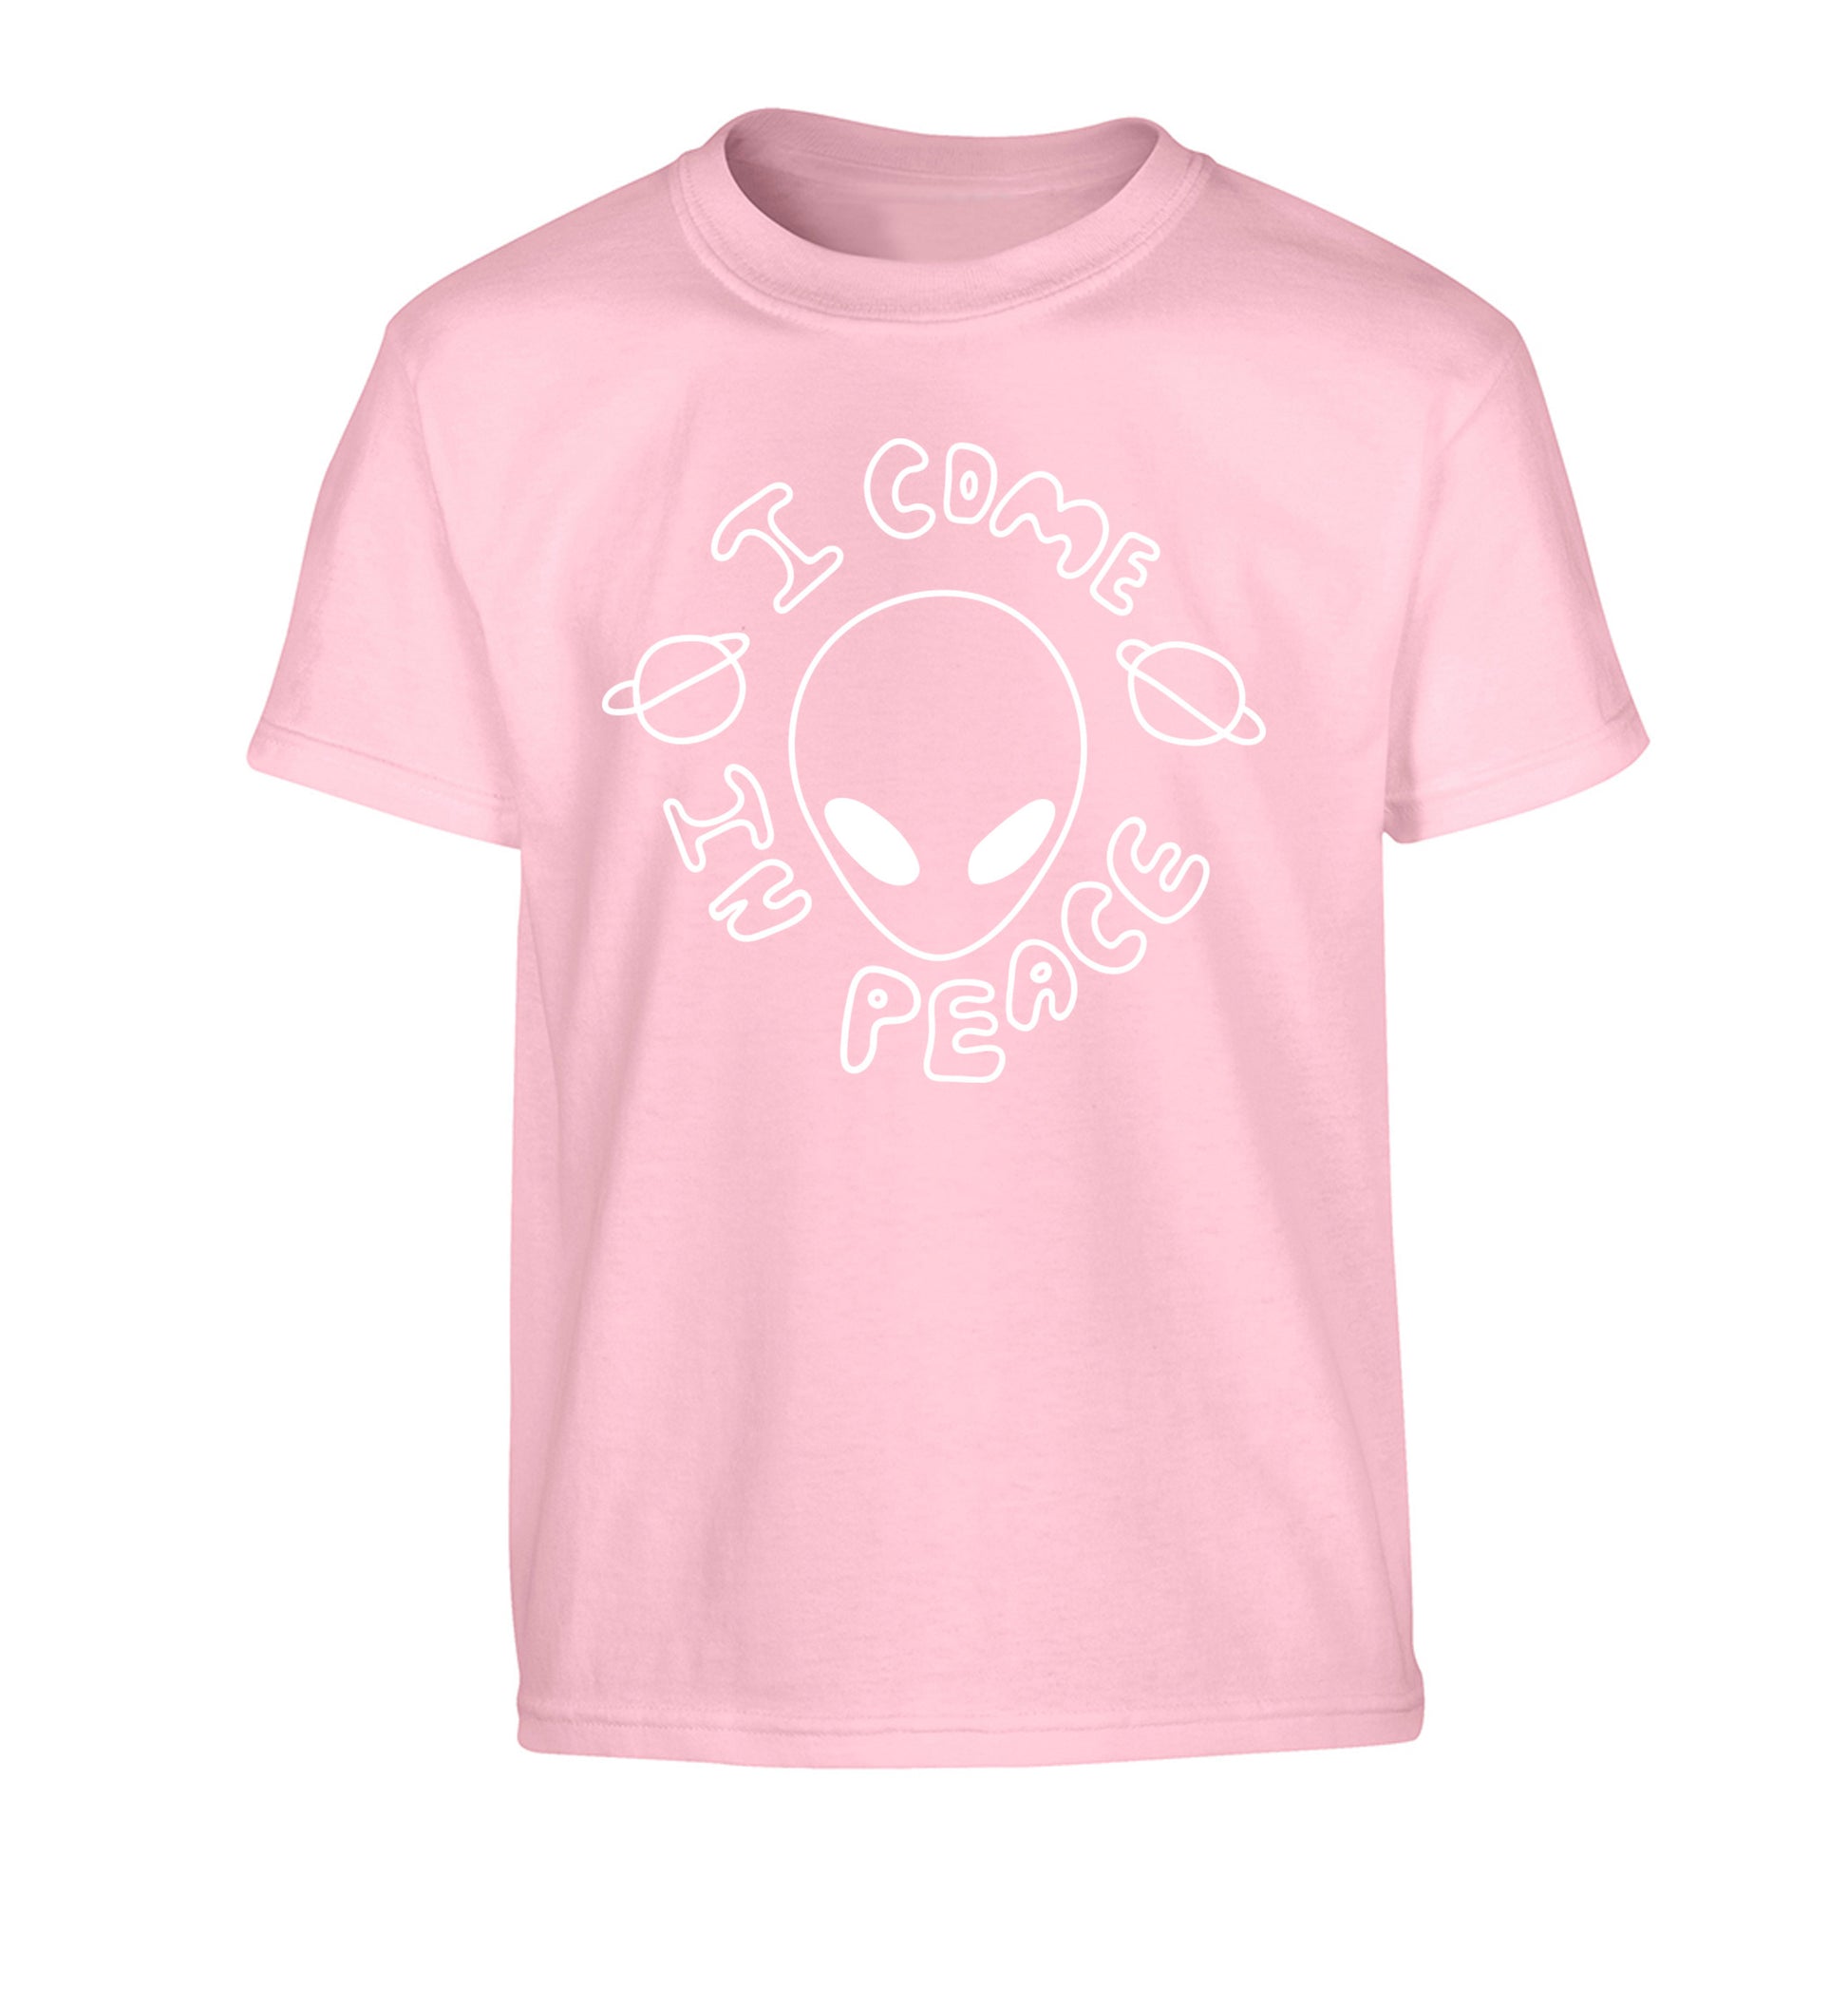 I come in peace Children's light pink Tshirt 12-14 Years